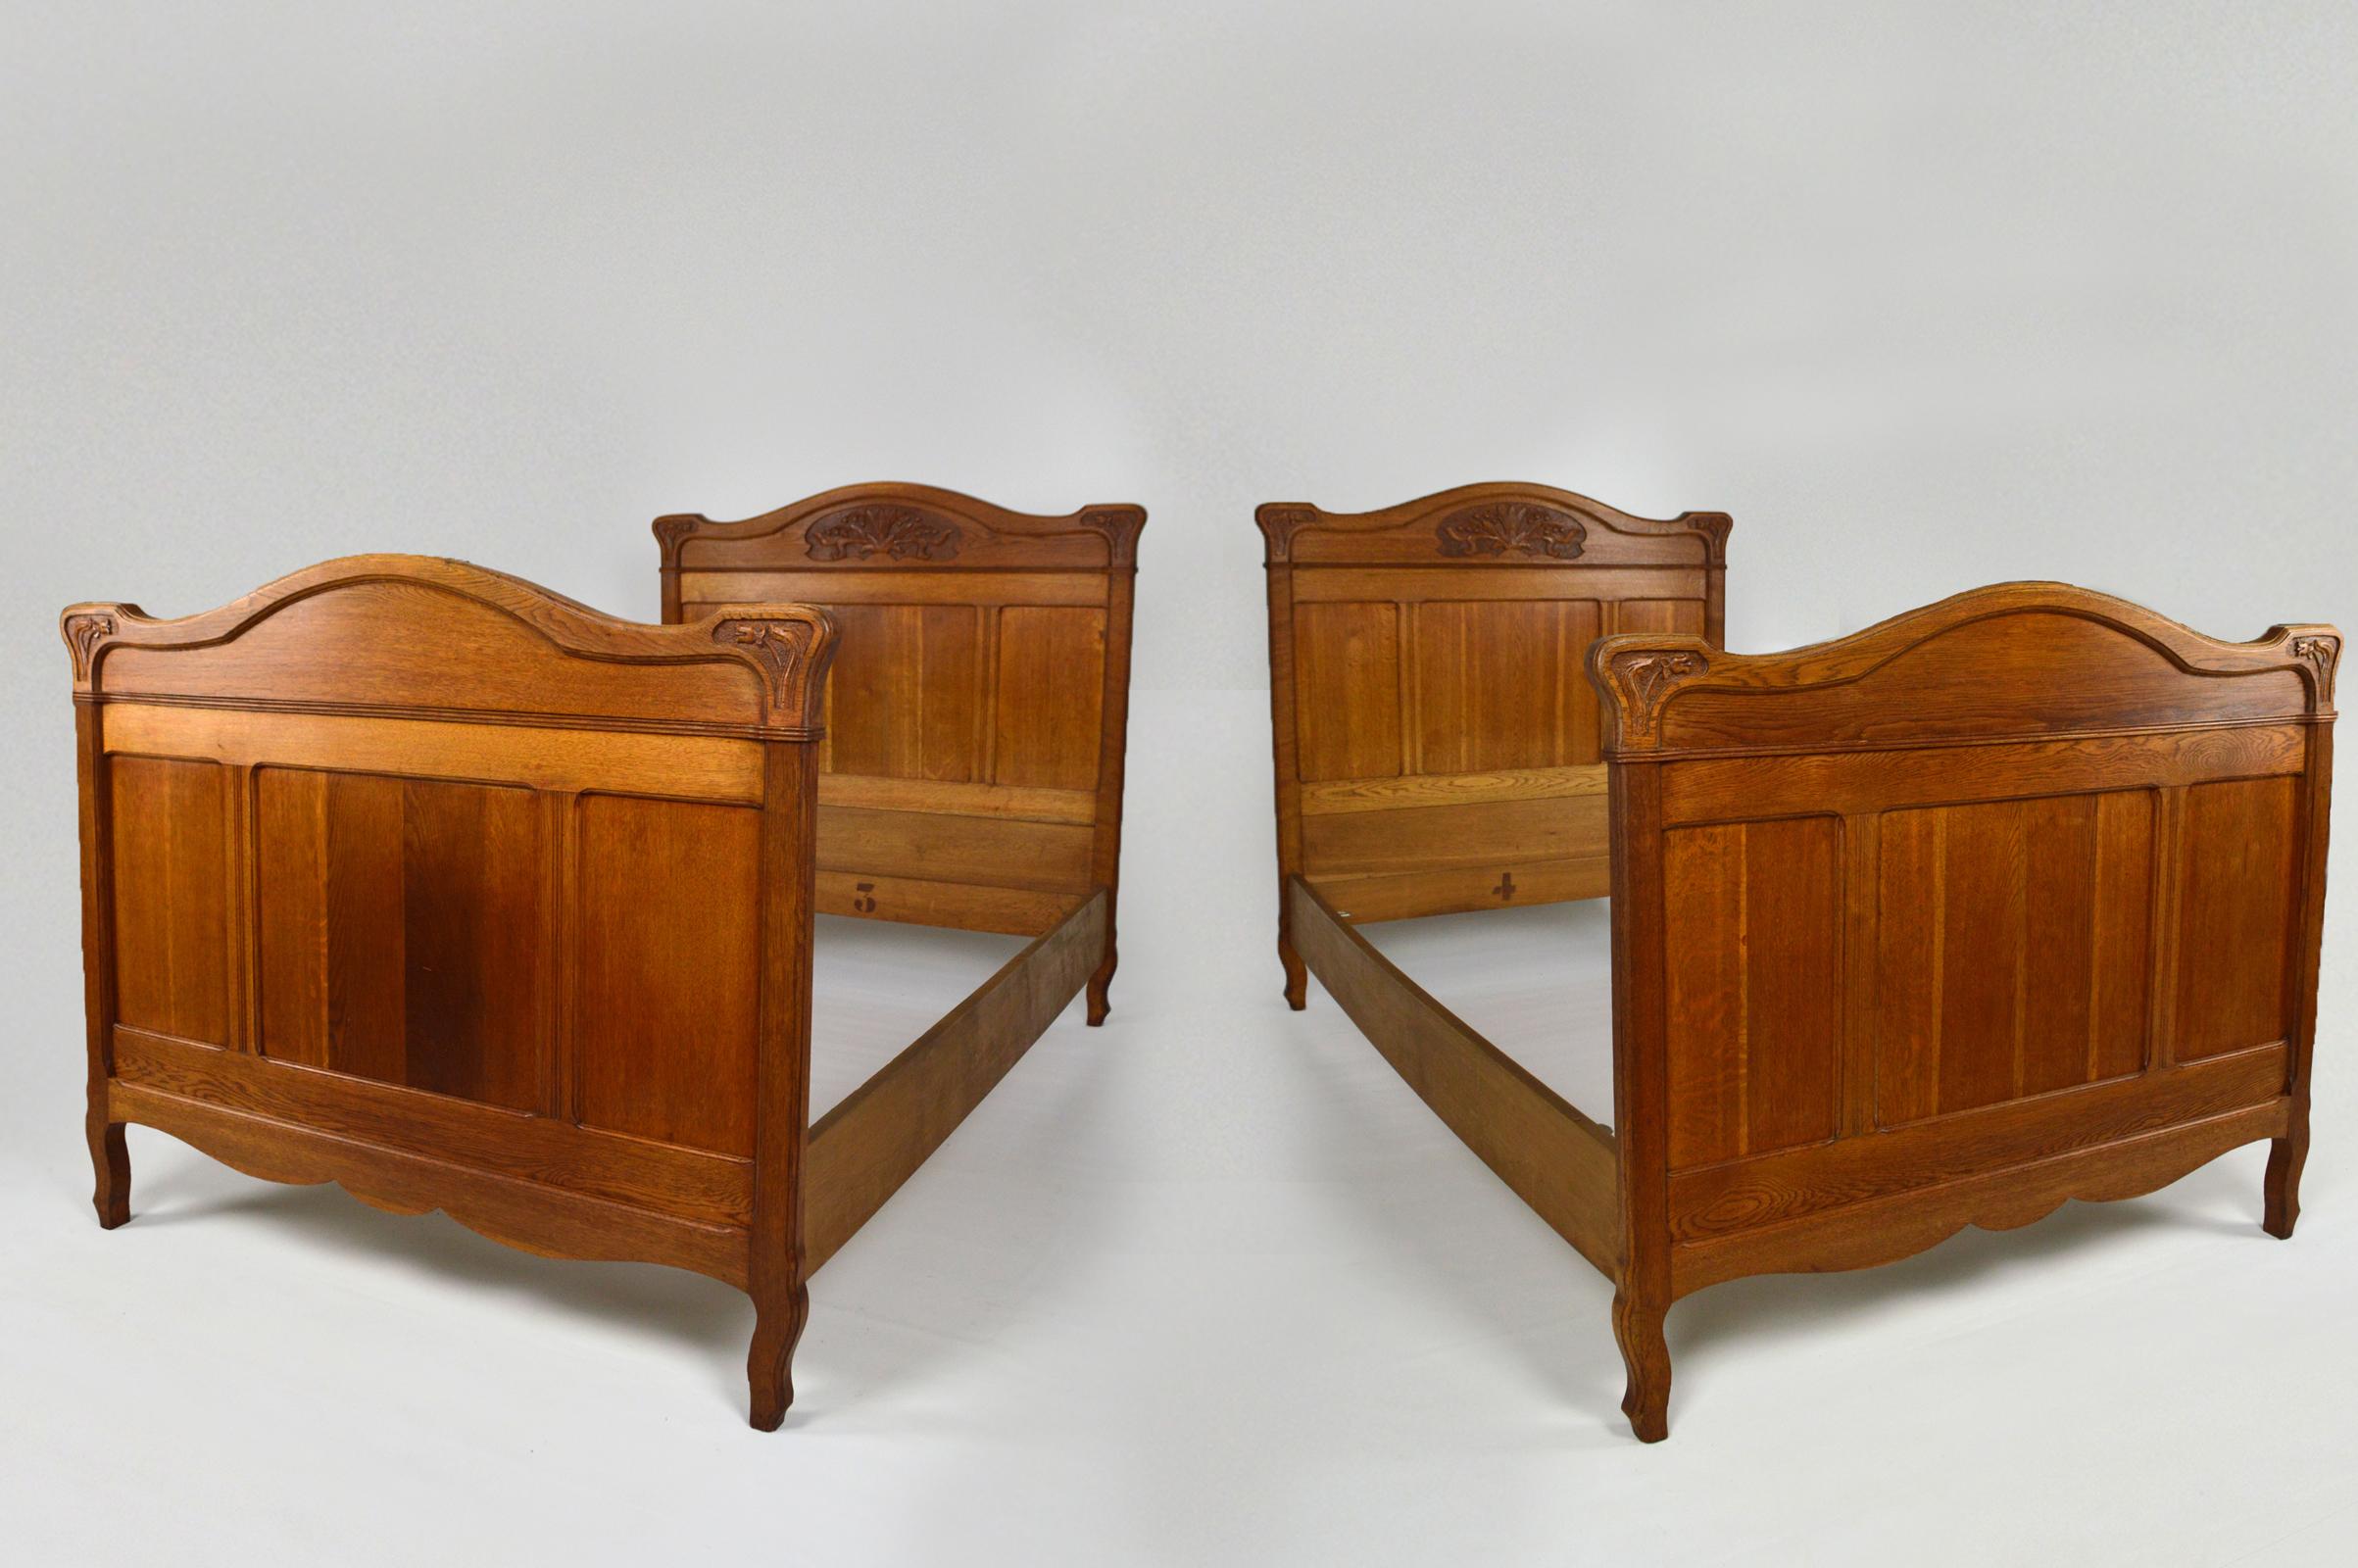 French Art Nouveau Twin Beds Bedroom Set of 3 in Solid Carved Oak, circa 1910 For Sale 8